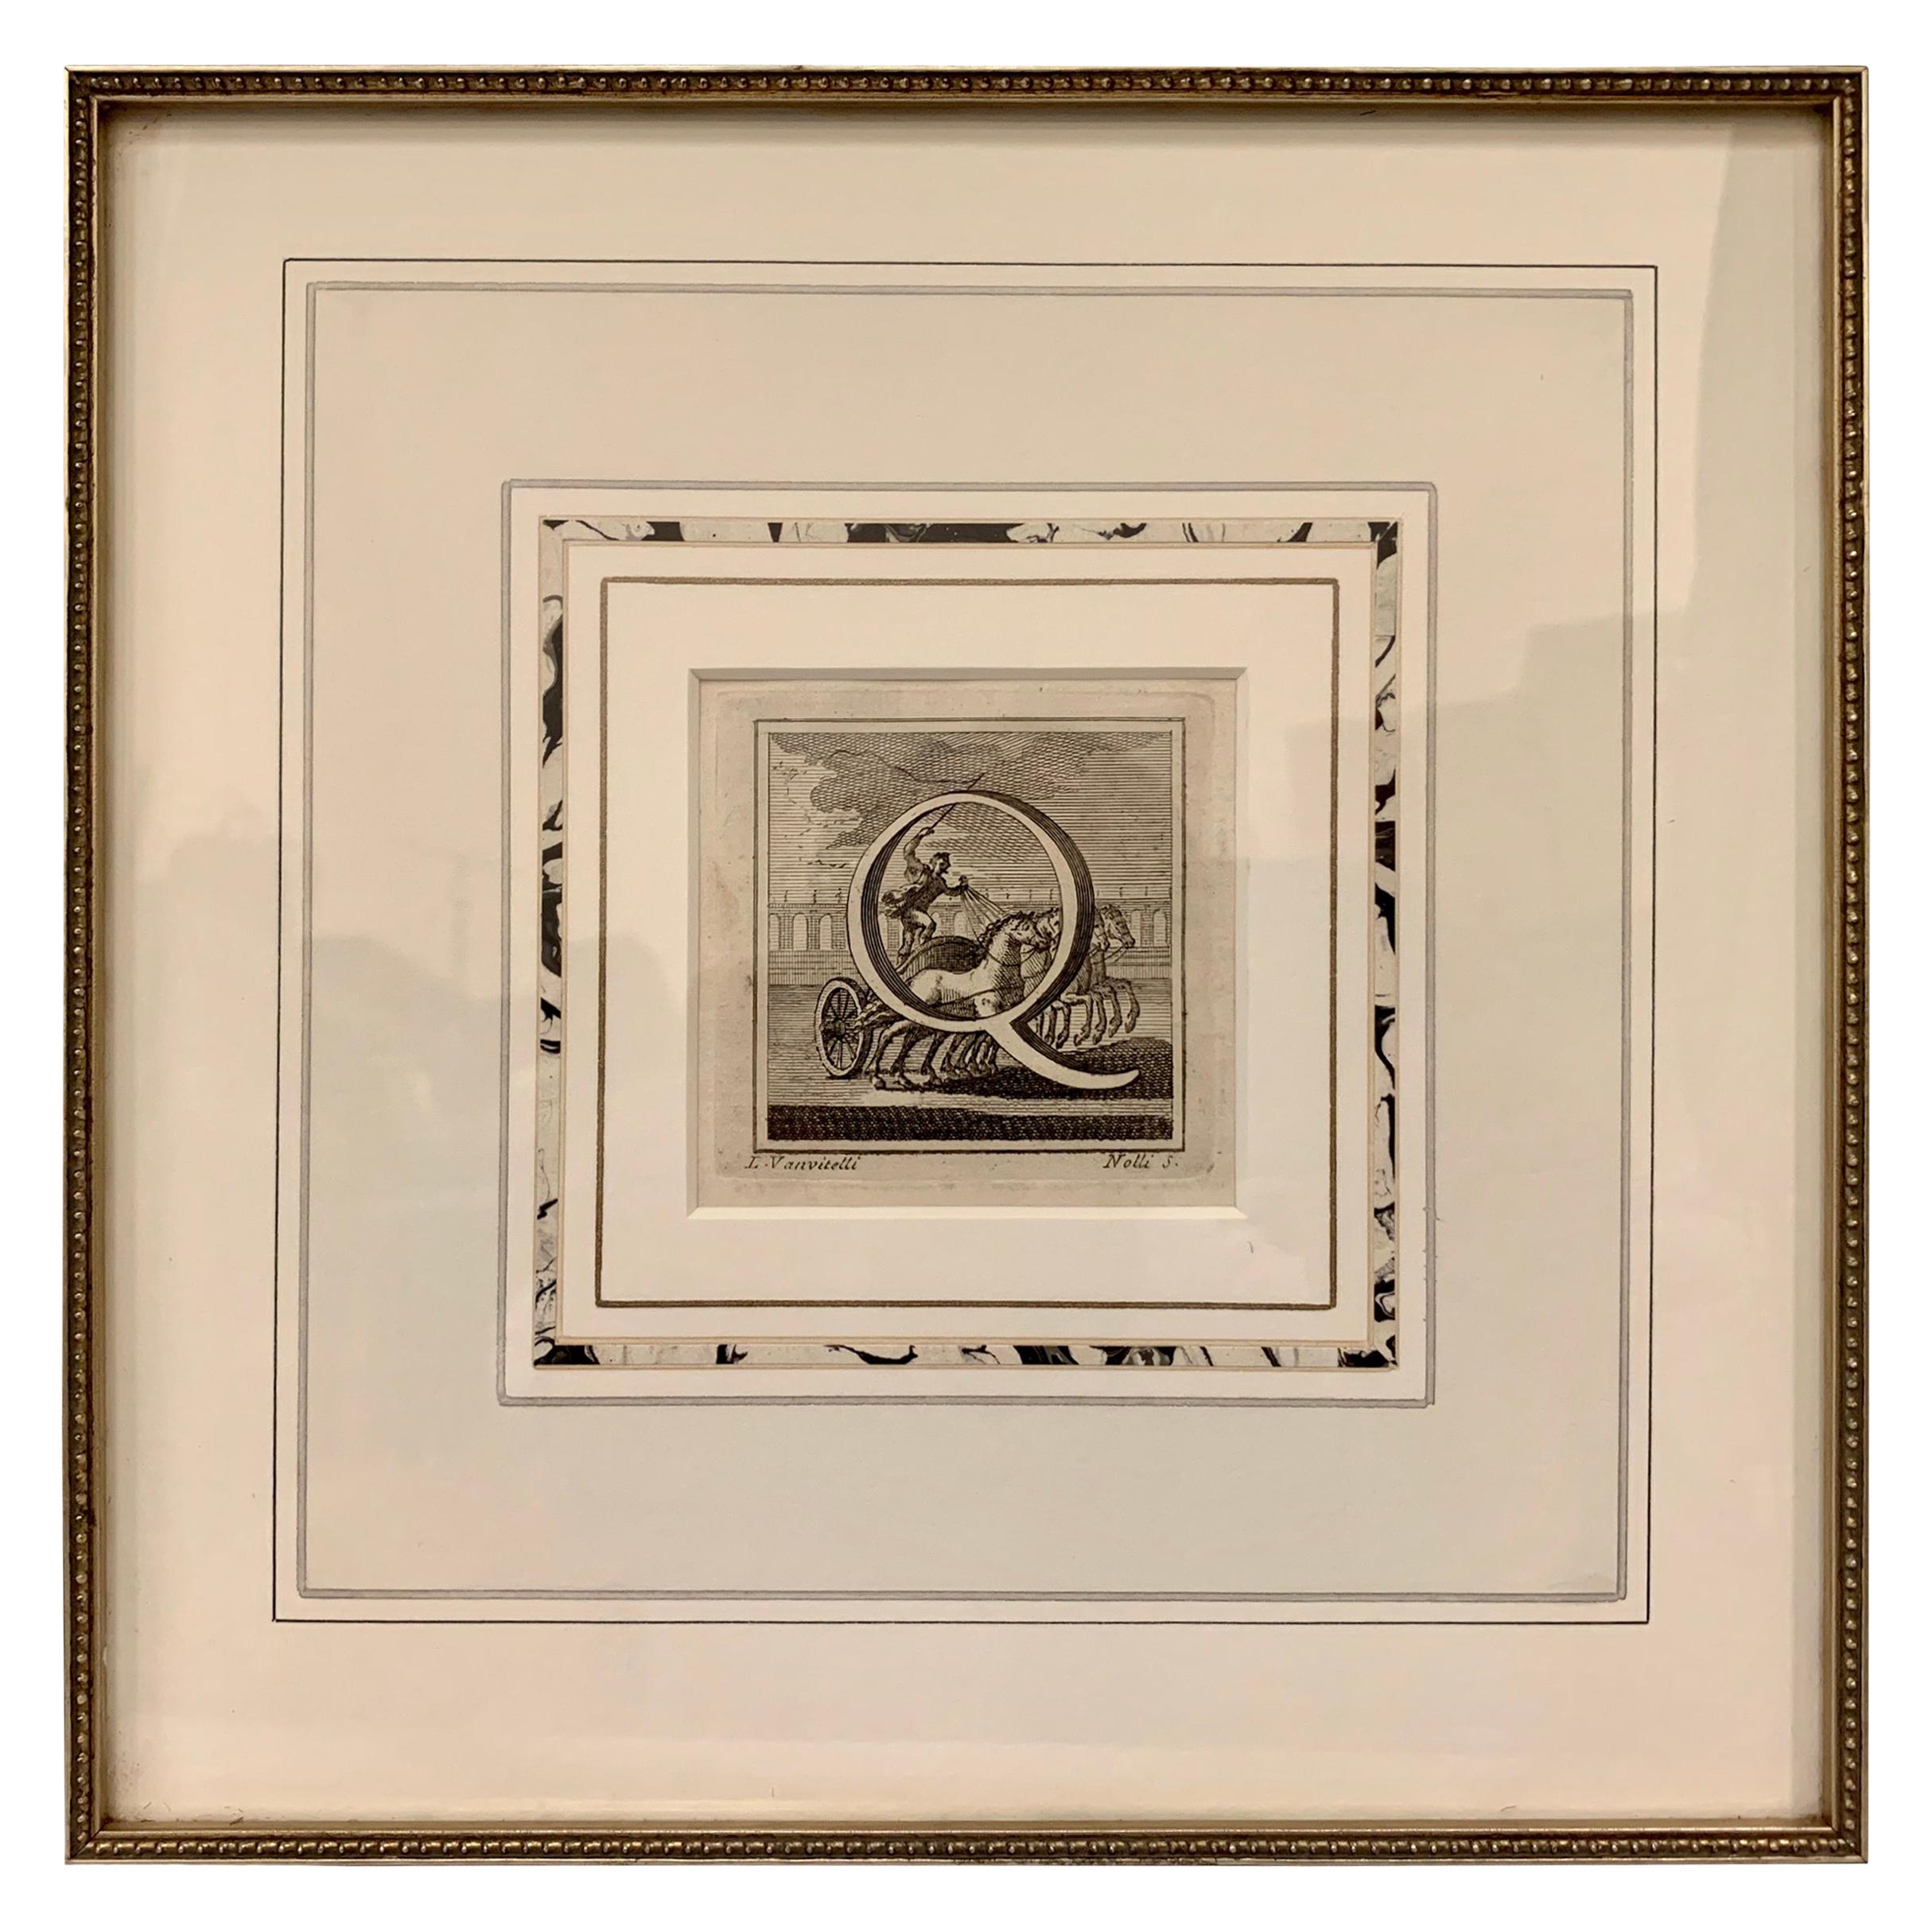 The Letter "Q" an Engraving by L. Vanvitelli,  1771